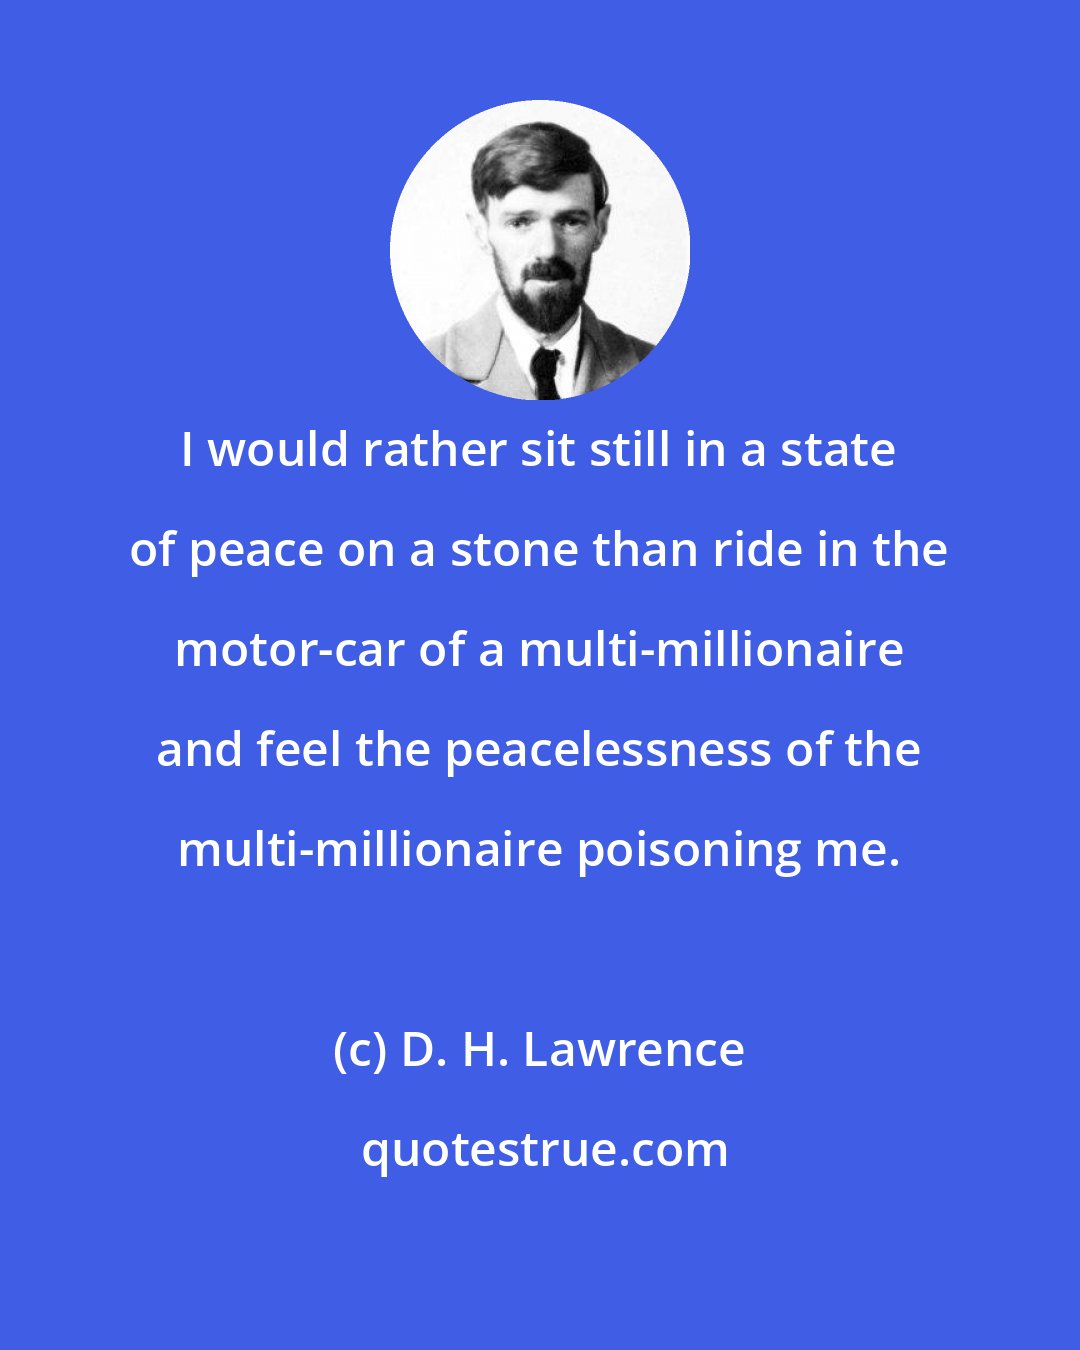 D. H. Lawrence: I would rather sit still in a state of peace on a stone than ride in the motor-car of a multi-millionaire and feel the peacelessness of the multi-millionaire poisoning me.